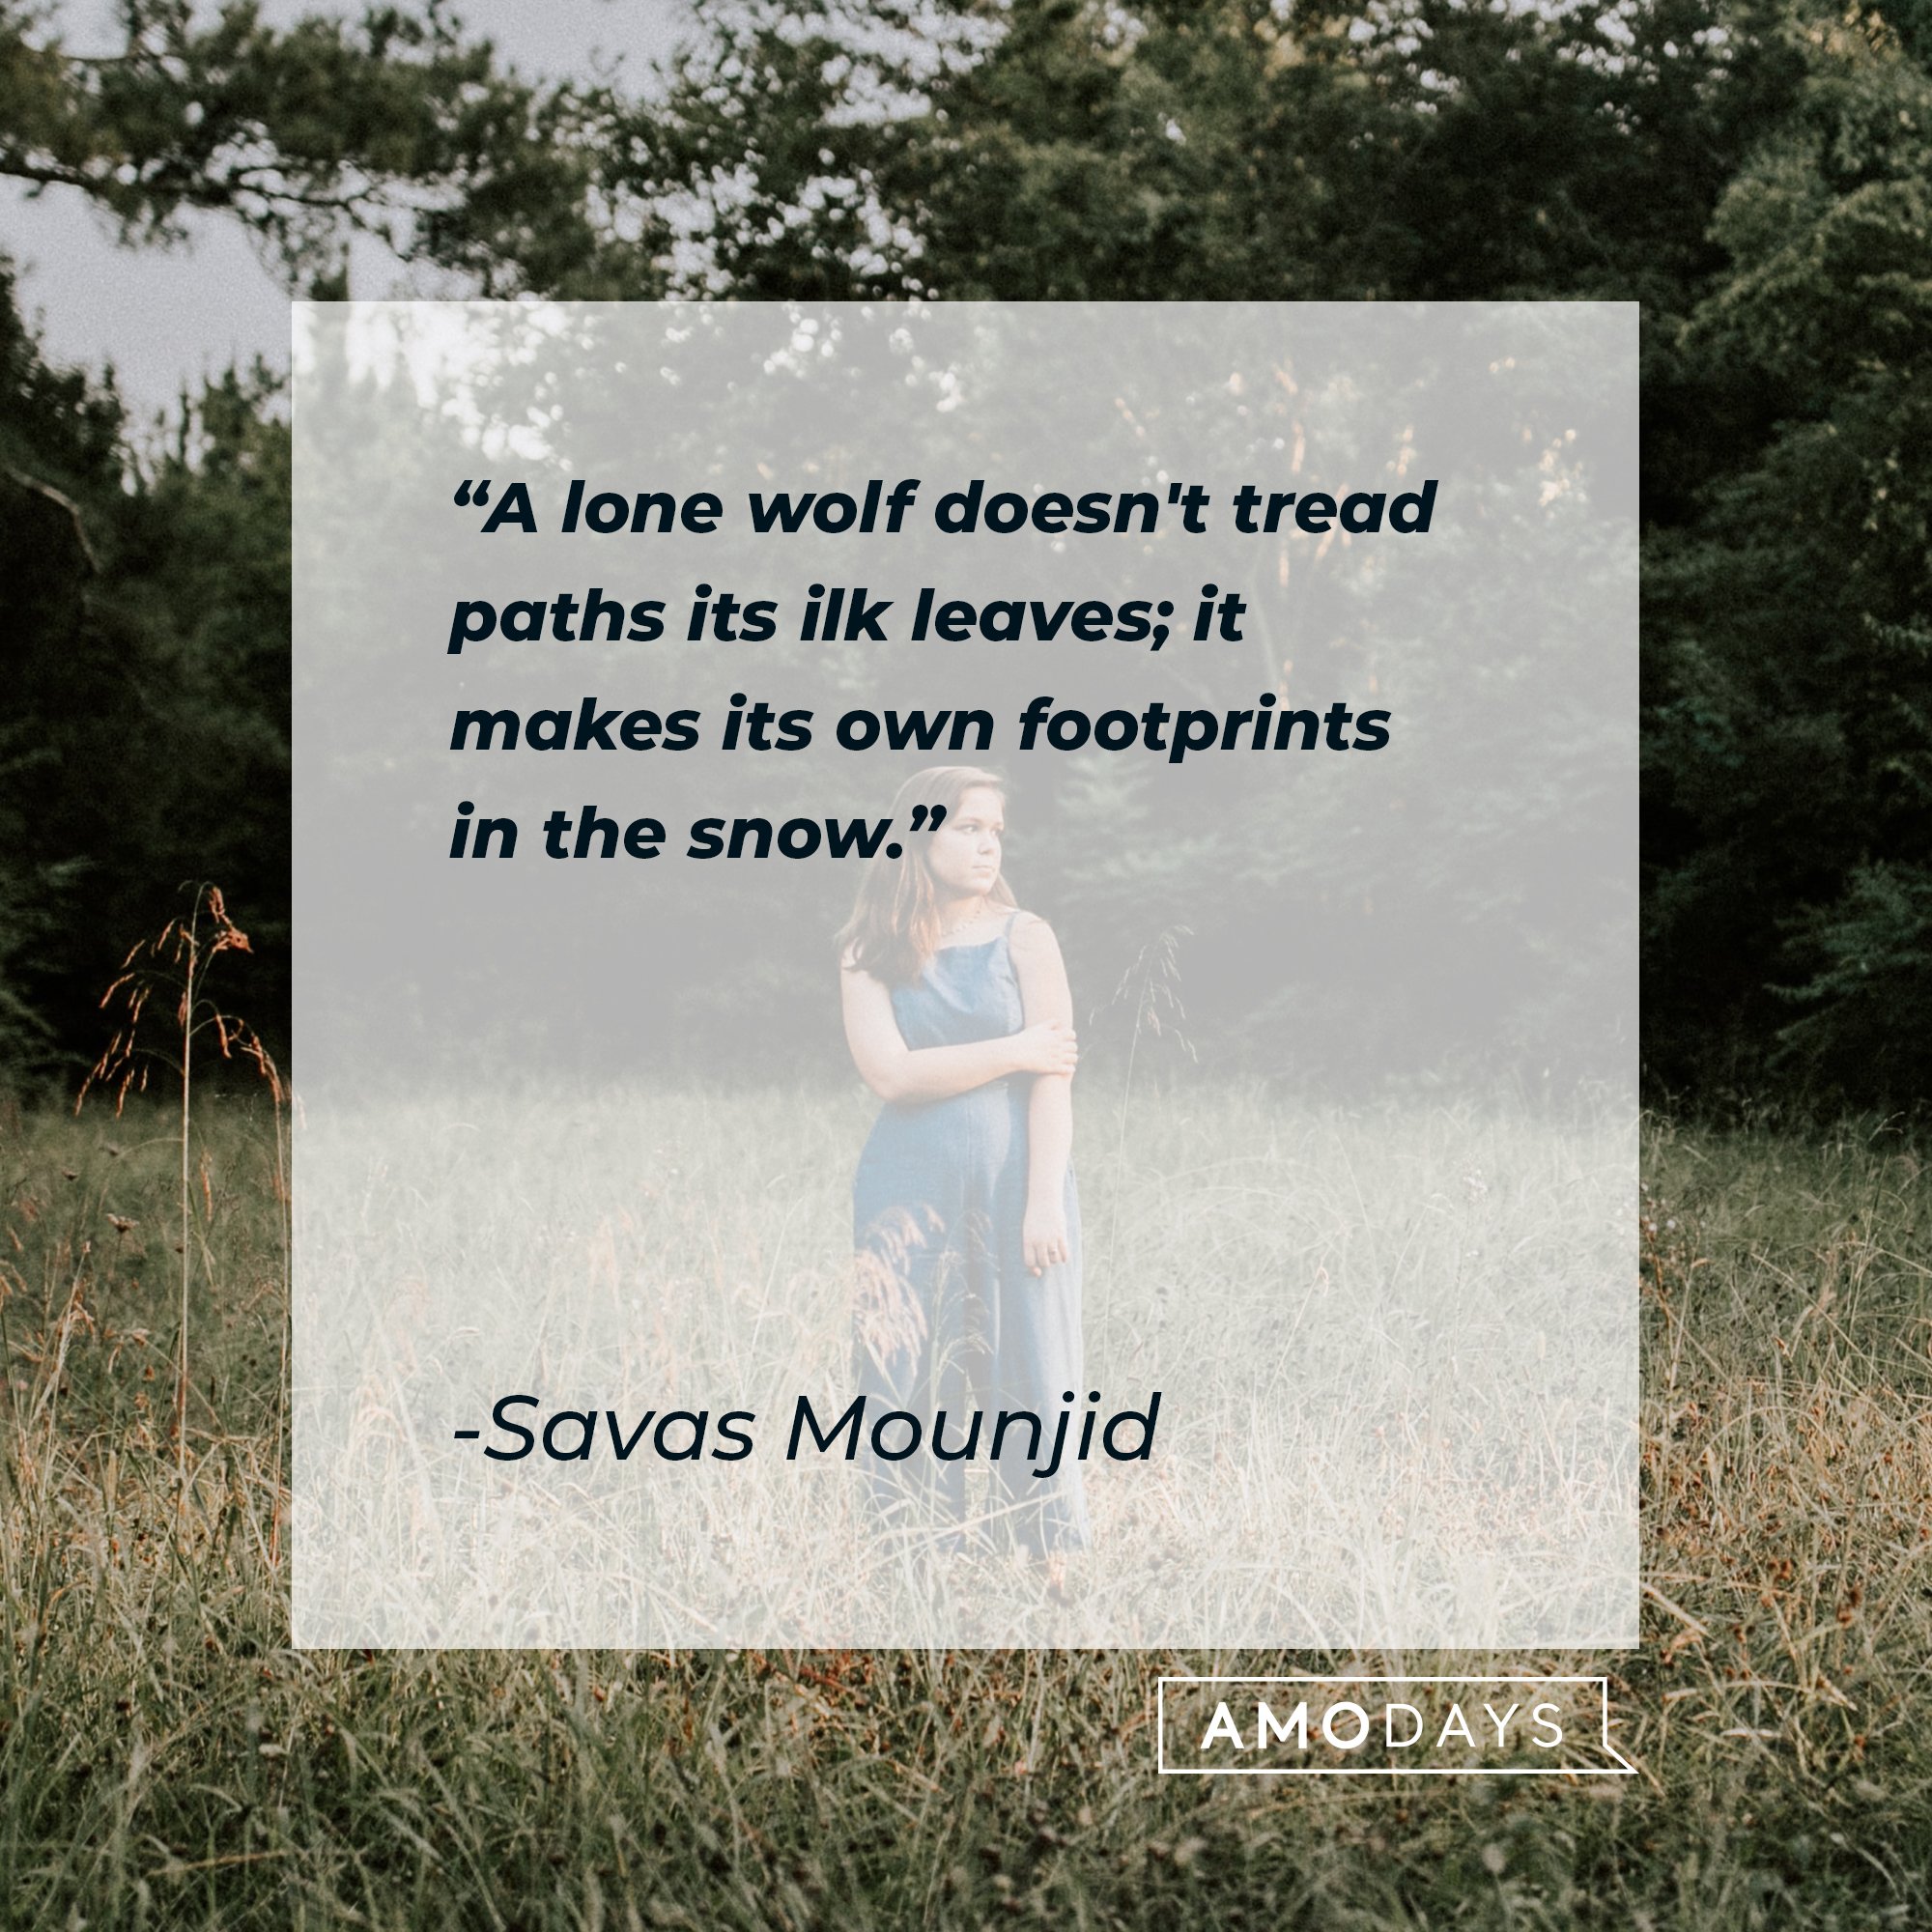 Savas Mounjid’s quote: "A lone wolf doesn't tread paths its ilk leaves; it makes its own footprints in the snow." | Image: AmoDays